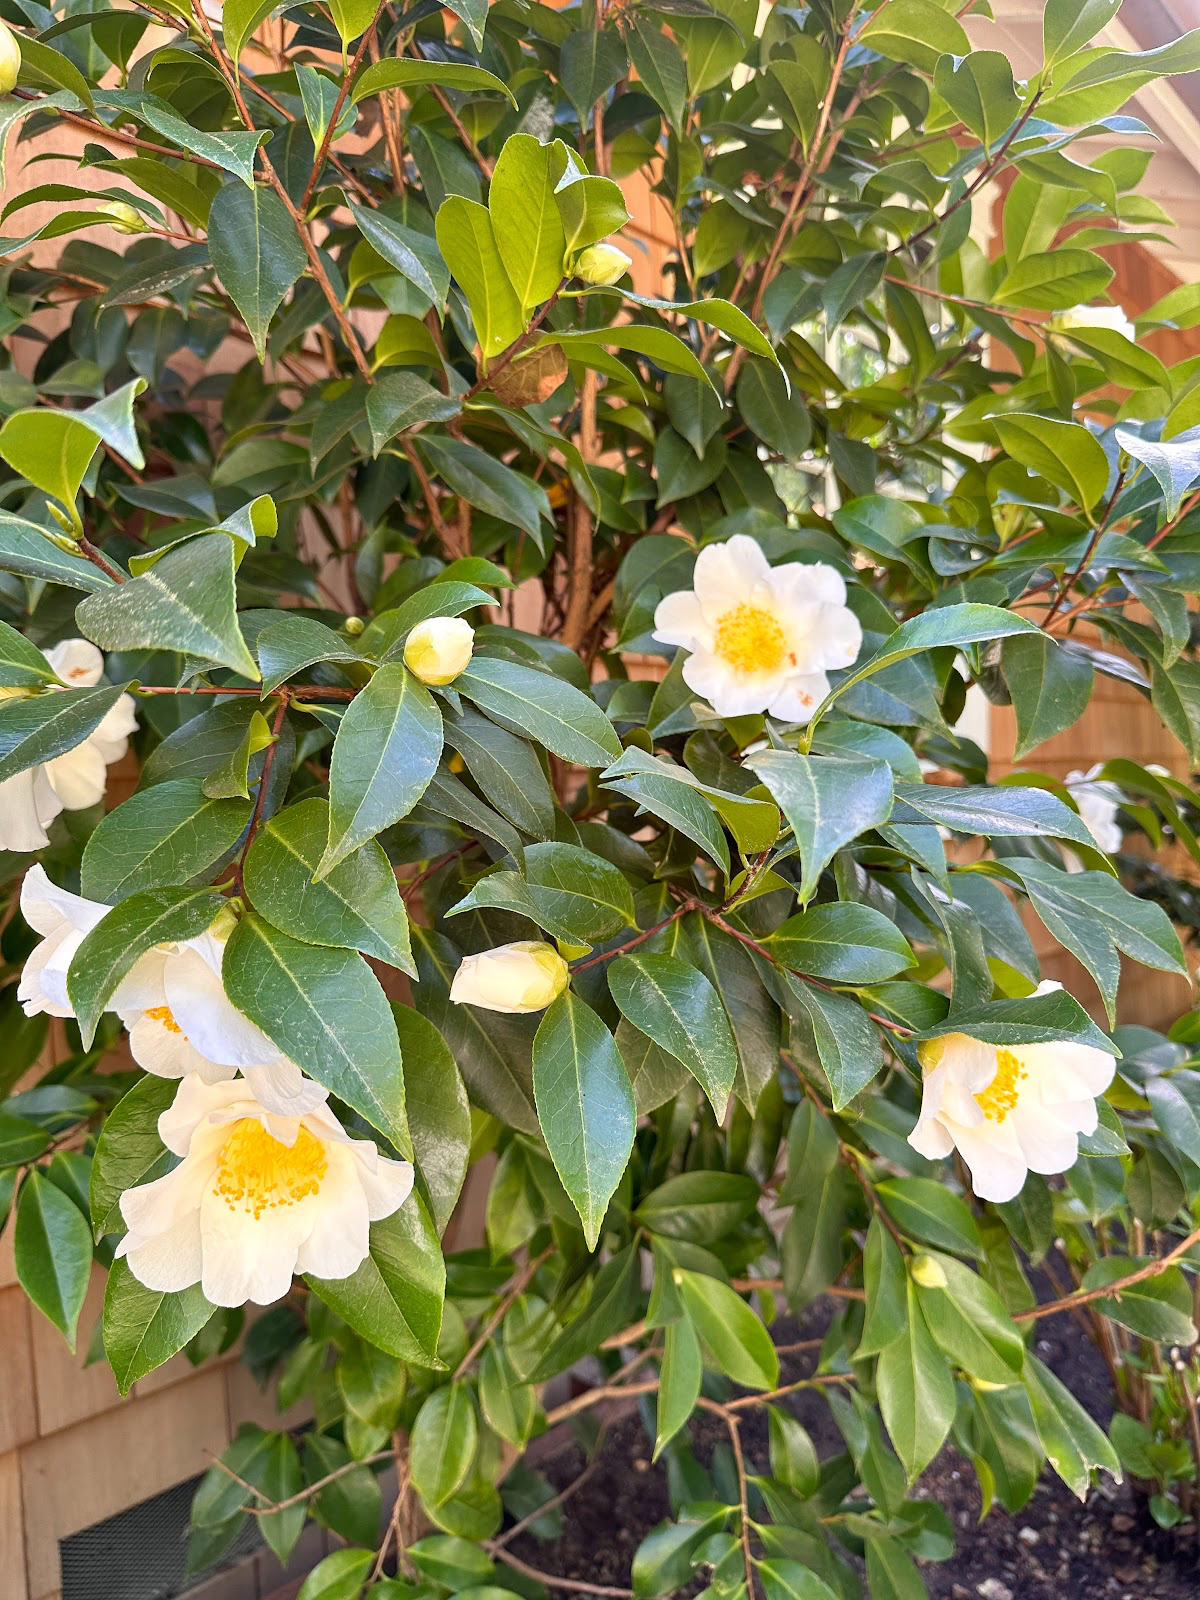 Camelia bush blooming in early spring.